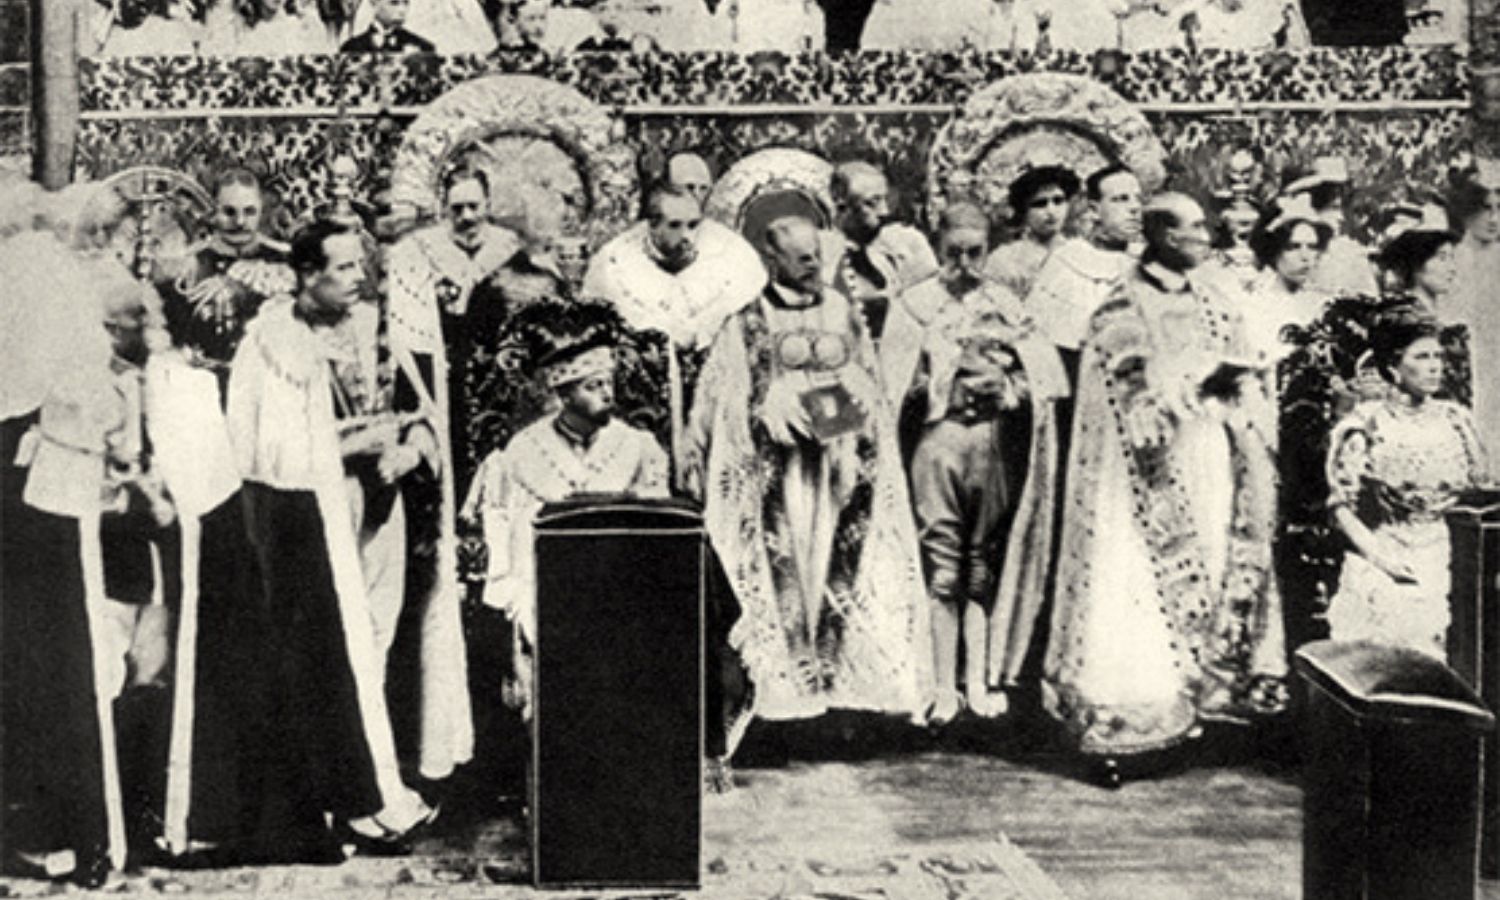 OTD in 1911: The royal coronation of King George V and Queen Mary took place in the UK.